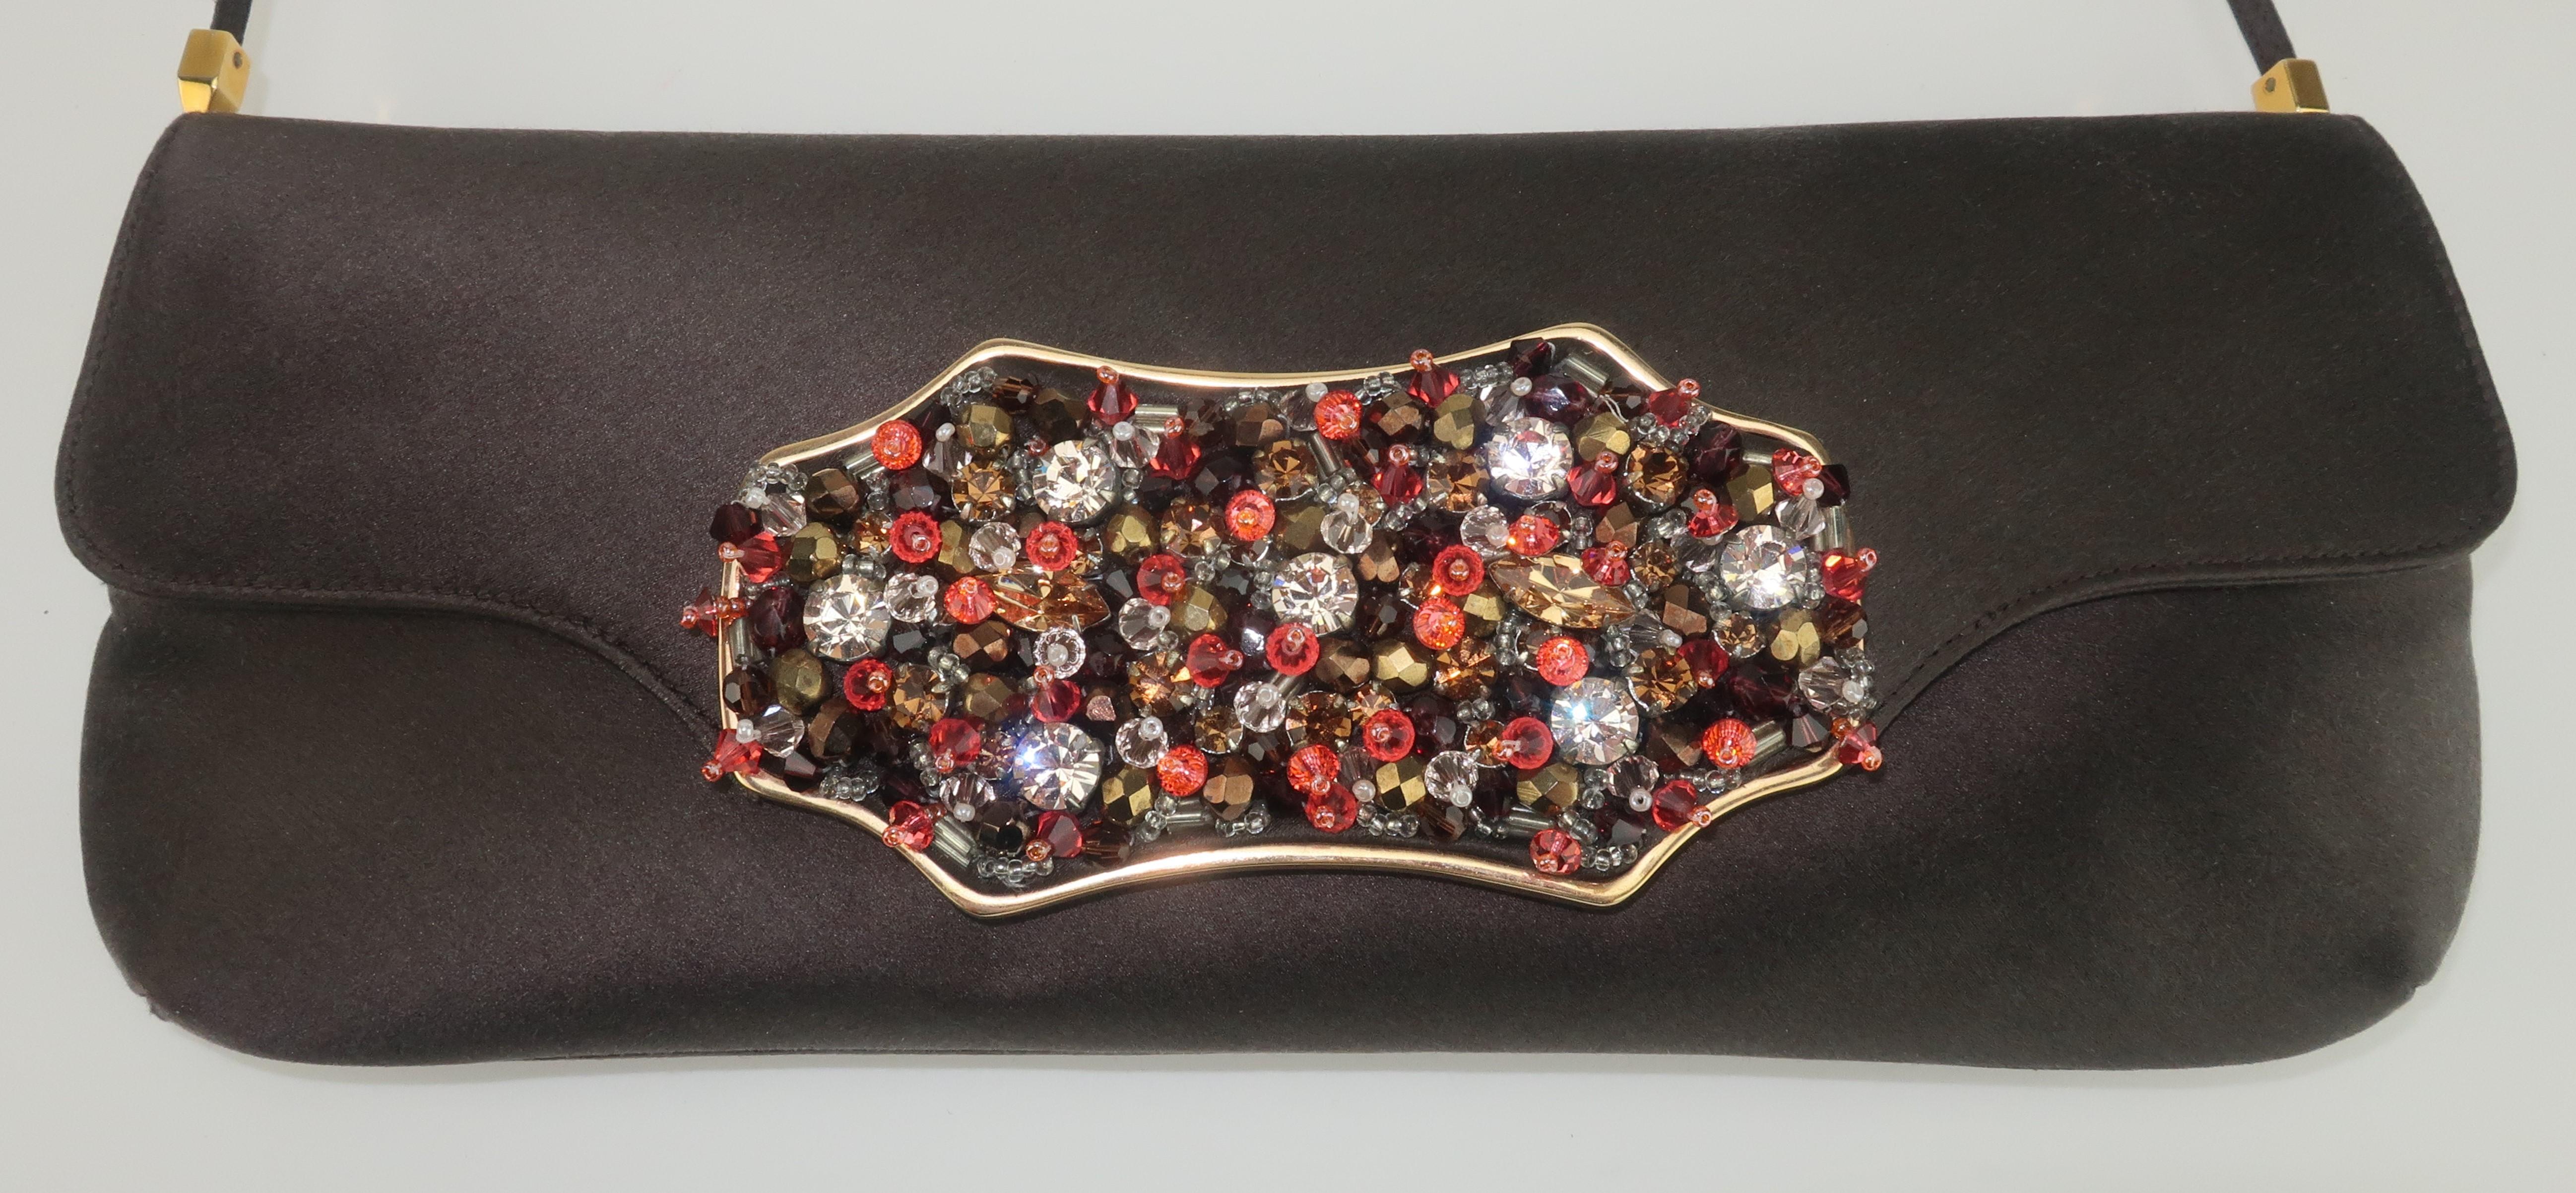 Lovely Judith Leiber dark brown satin evening handbag with an envelope style silhouette and a front flap embellished with an array of beading and crystal rhinestones in shades of orange, amber, brown topaz and silvery crystal all set in a gold tone